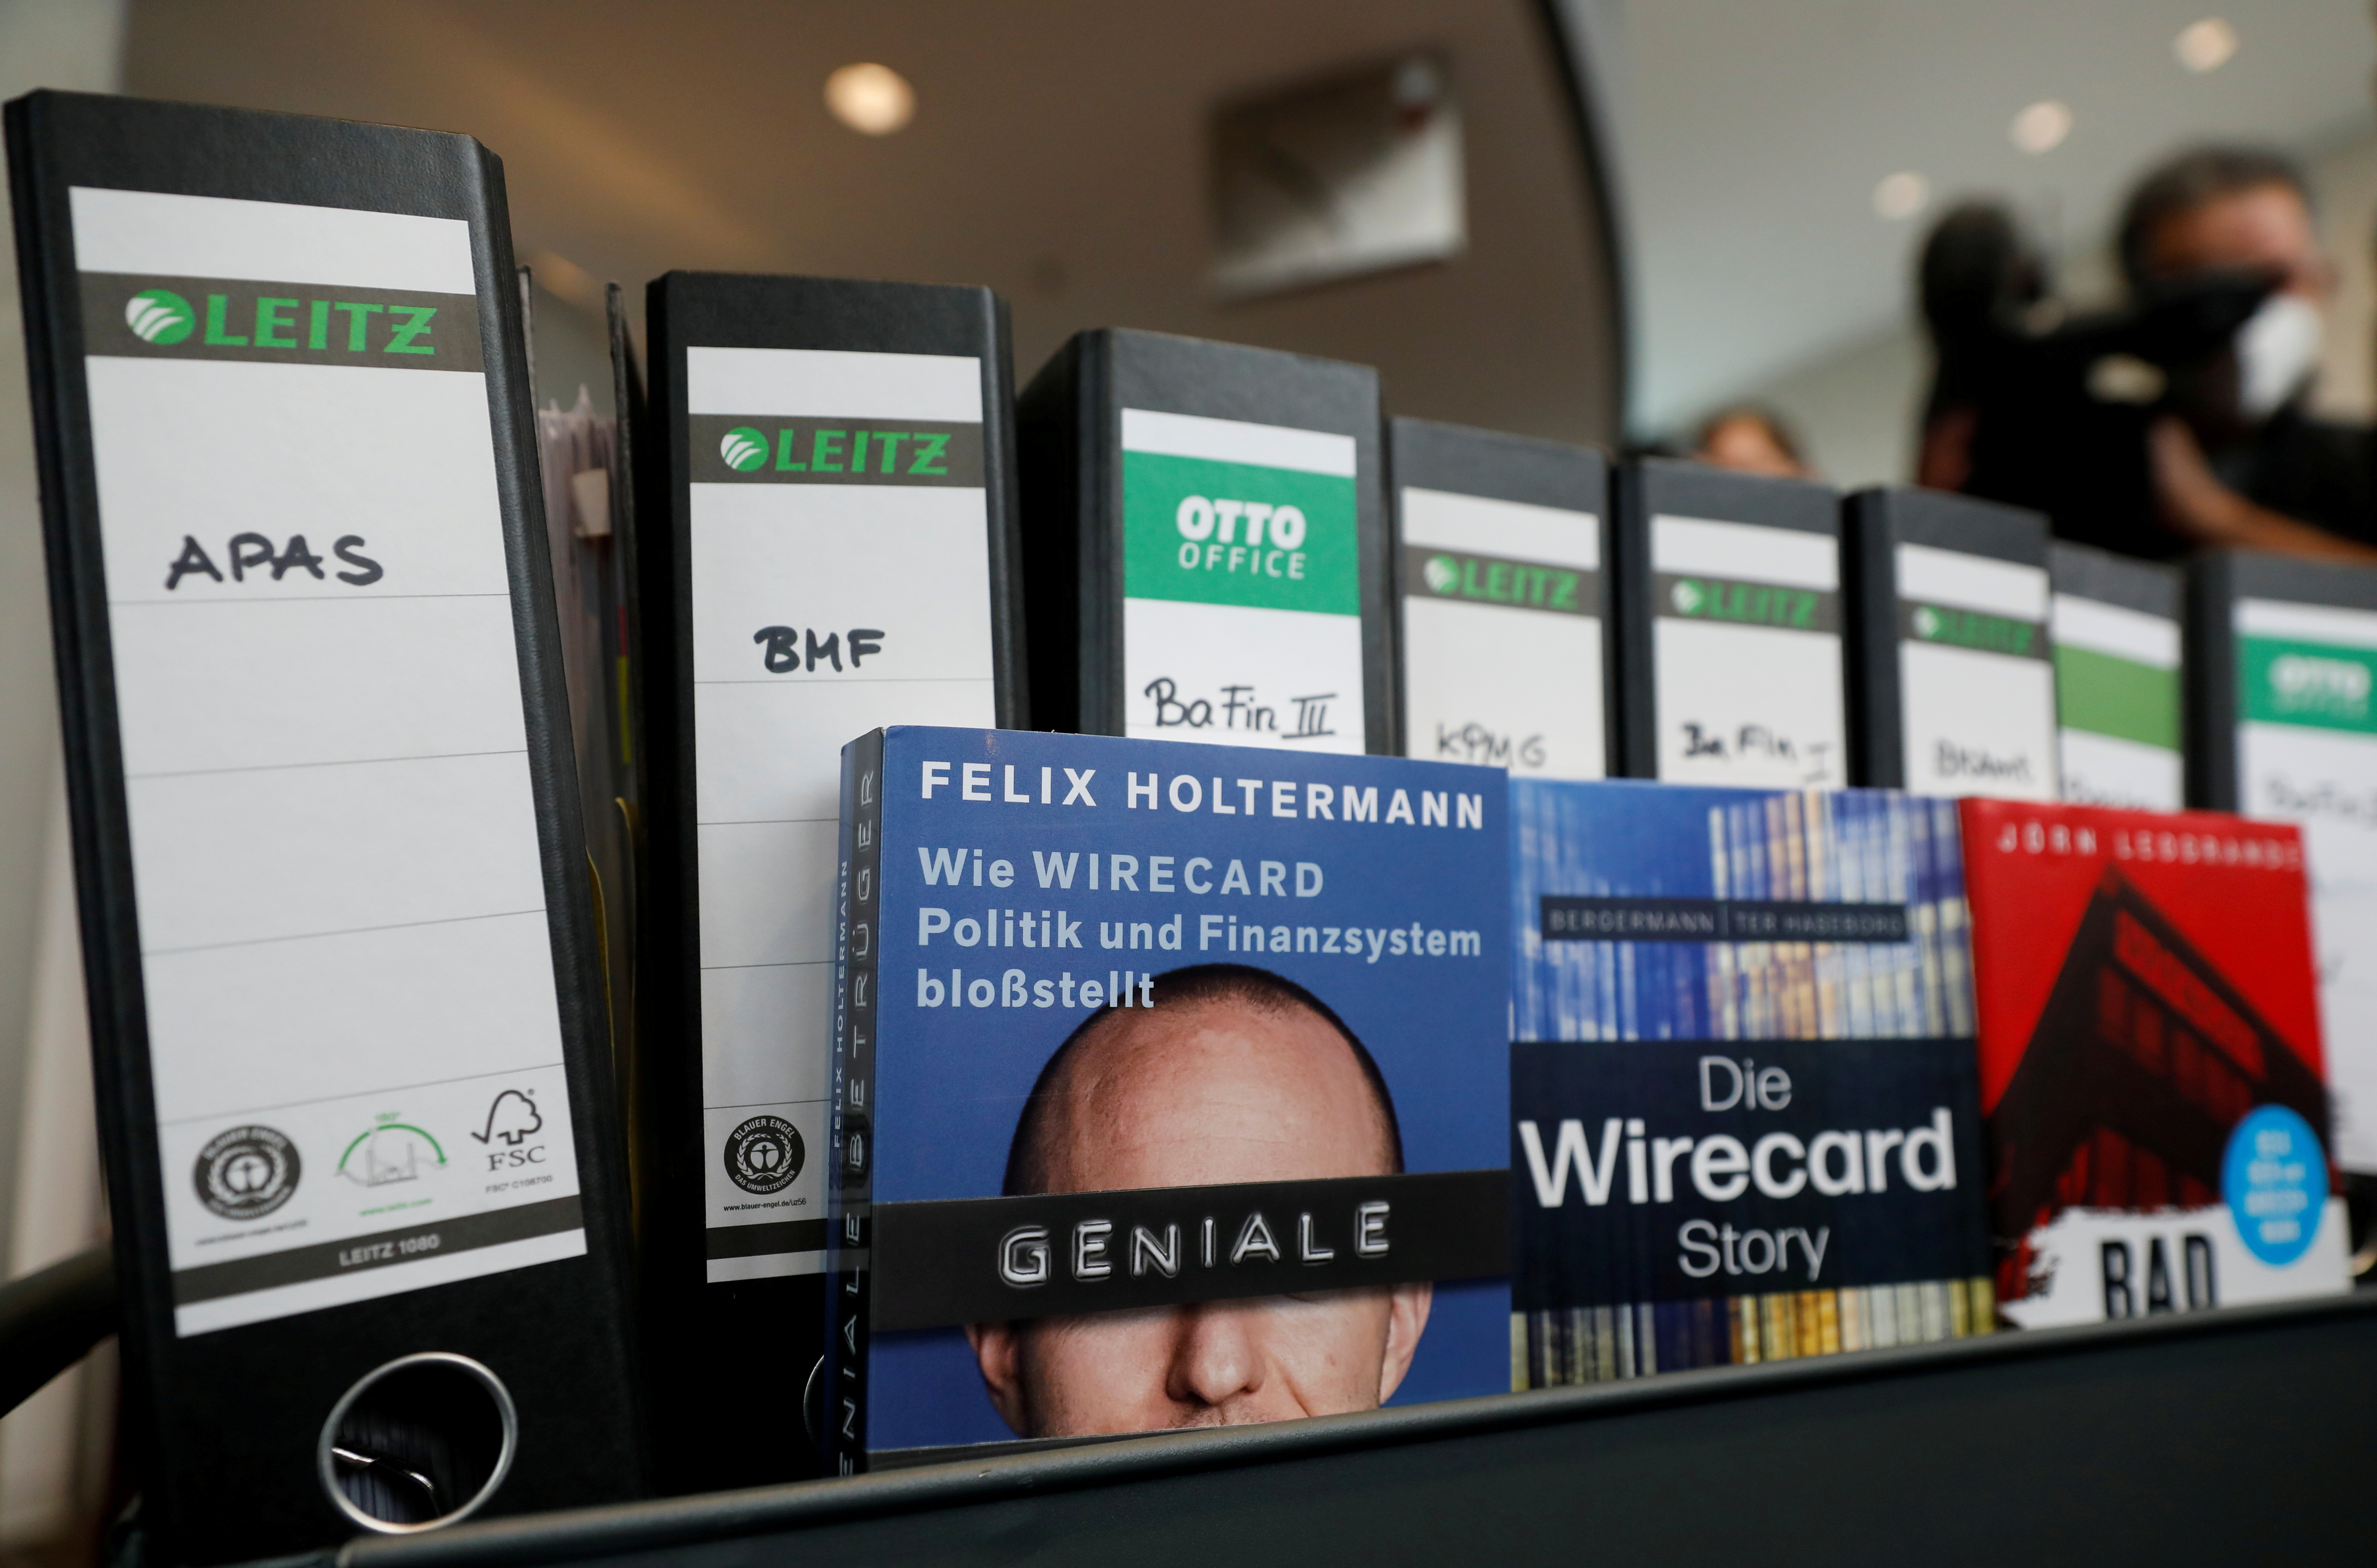 Wirecard acts and books about the company are pictured, in Berlin, Germany April 22, 2021. REUTERS/Michele Tantussi